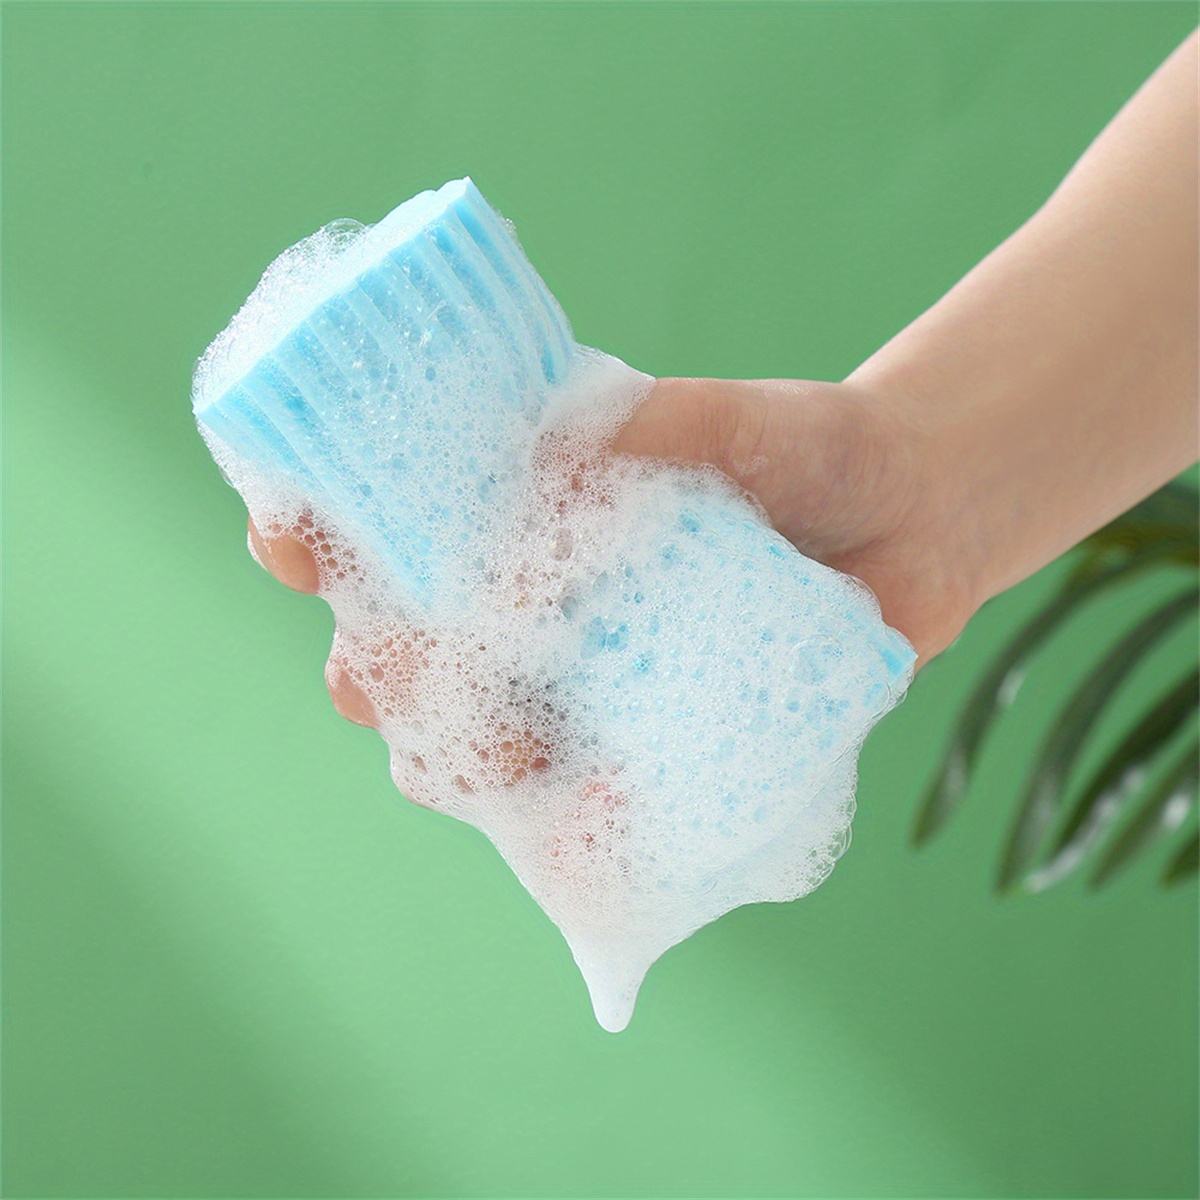 2 Pcs Damp Duster No Dust Flying&Spreading Cleaning Sponge Strong